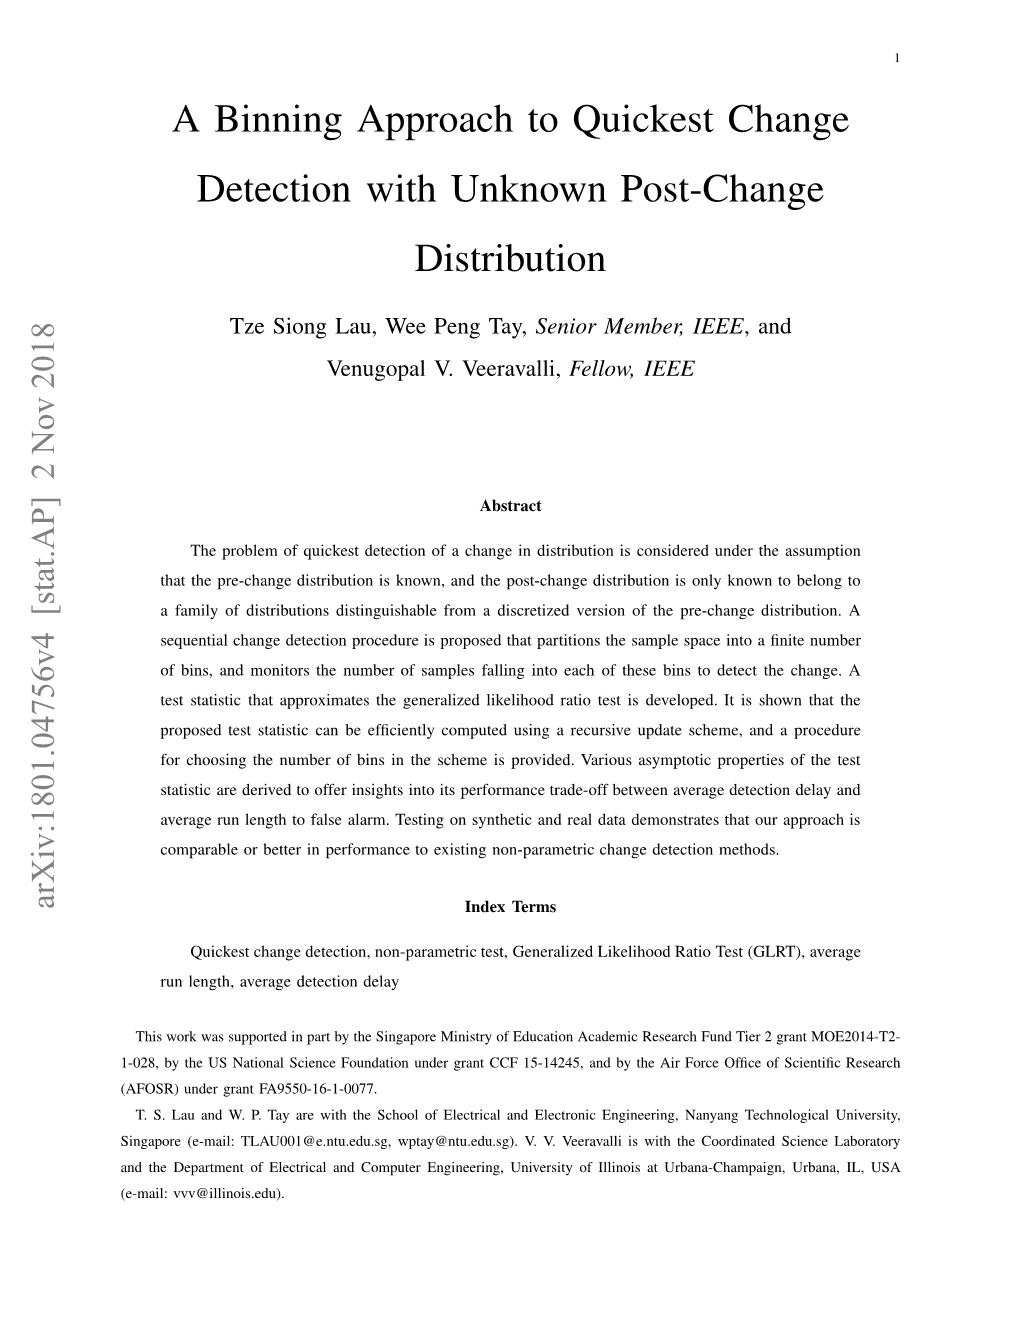 A Binning Approach to Quickest Change Detection with Unknown Post-Change Distribution"